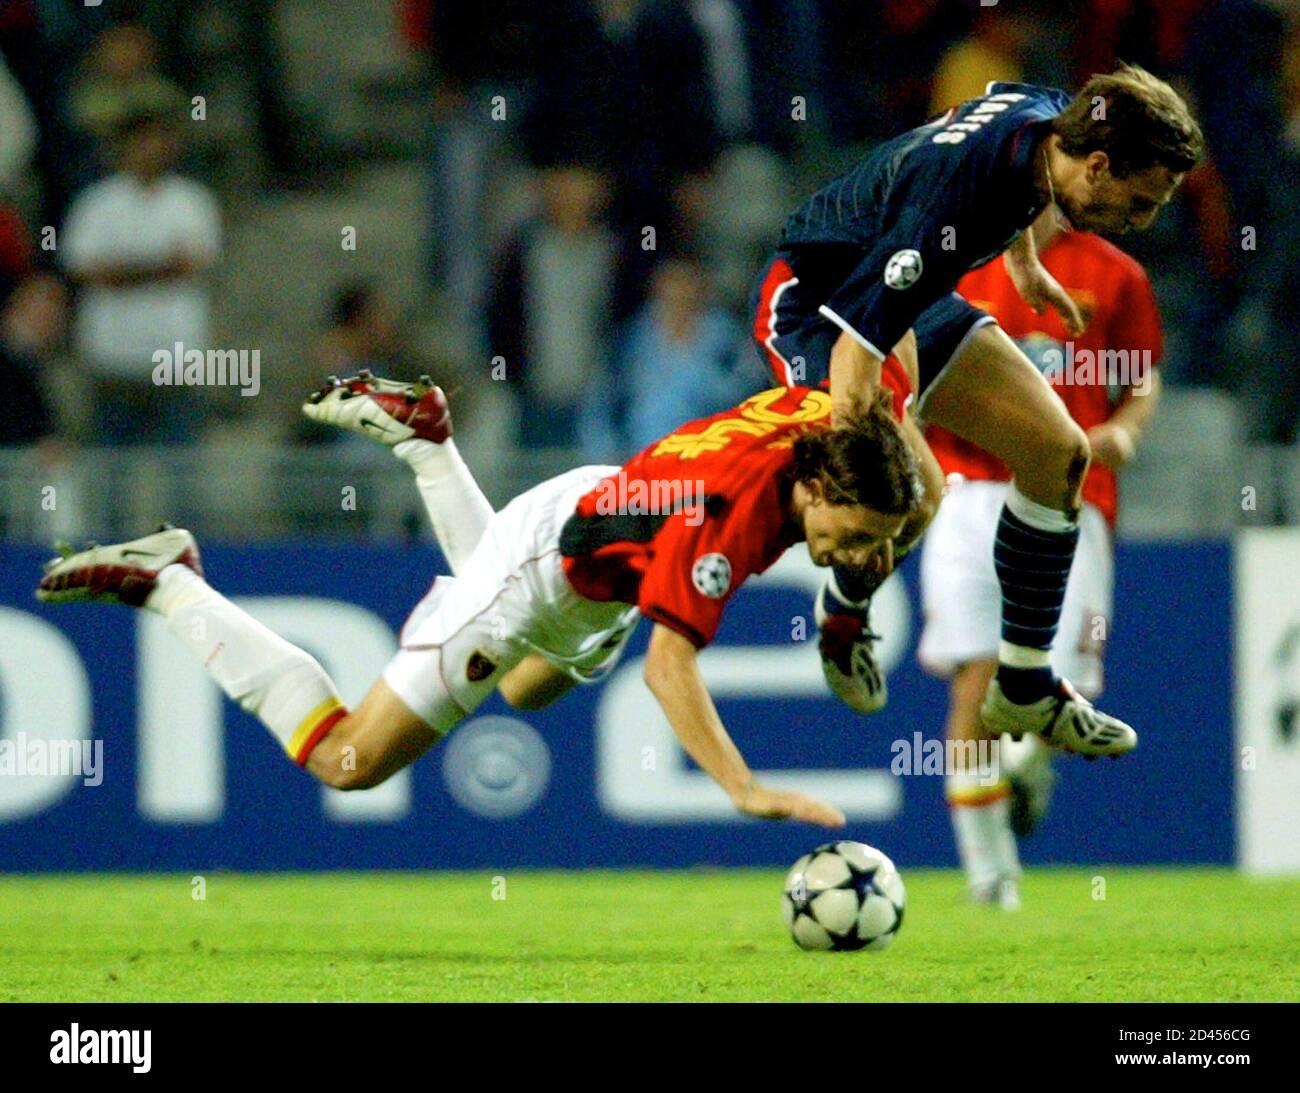 Galatasaray's Romanian midfielder Ovidiu Petre (L) is brought down by  Pantelis Kafes (R) of Olympiakos during their Champions League Group D  match in Istanbul October 21, 2003. Galatasaray beat Olympiakos 1-0.  REUTERS/Fatih